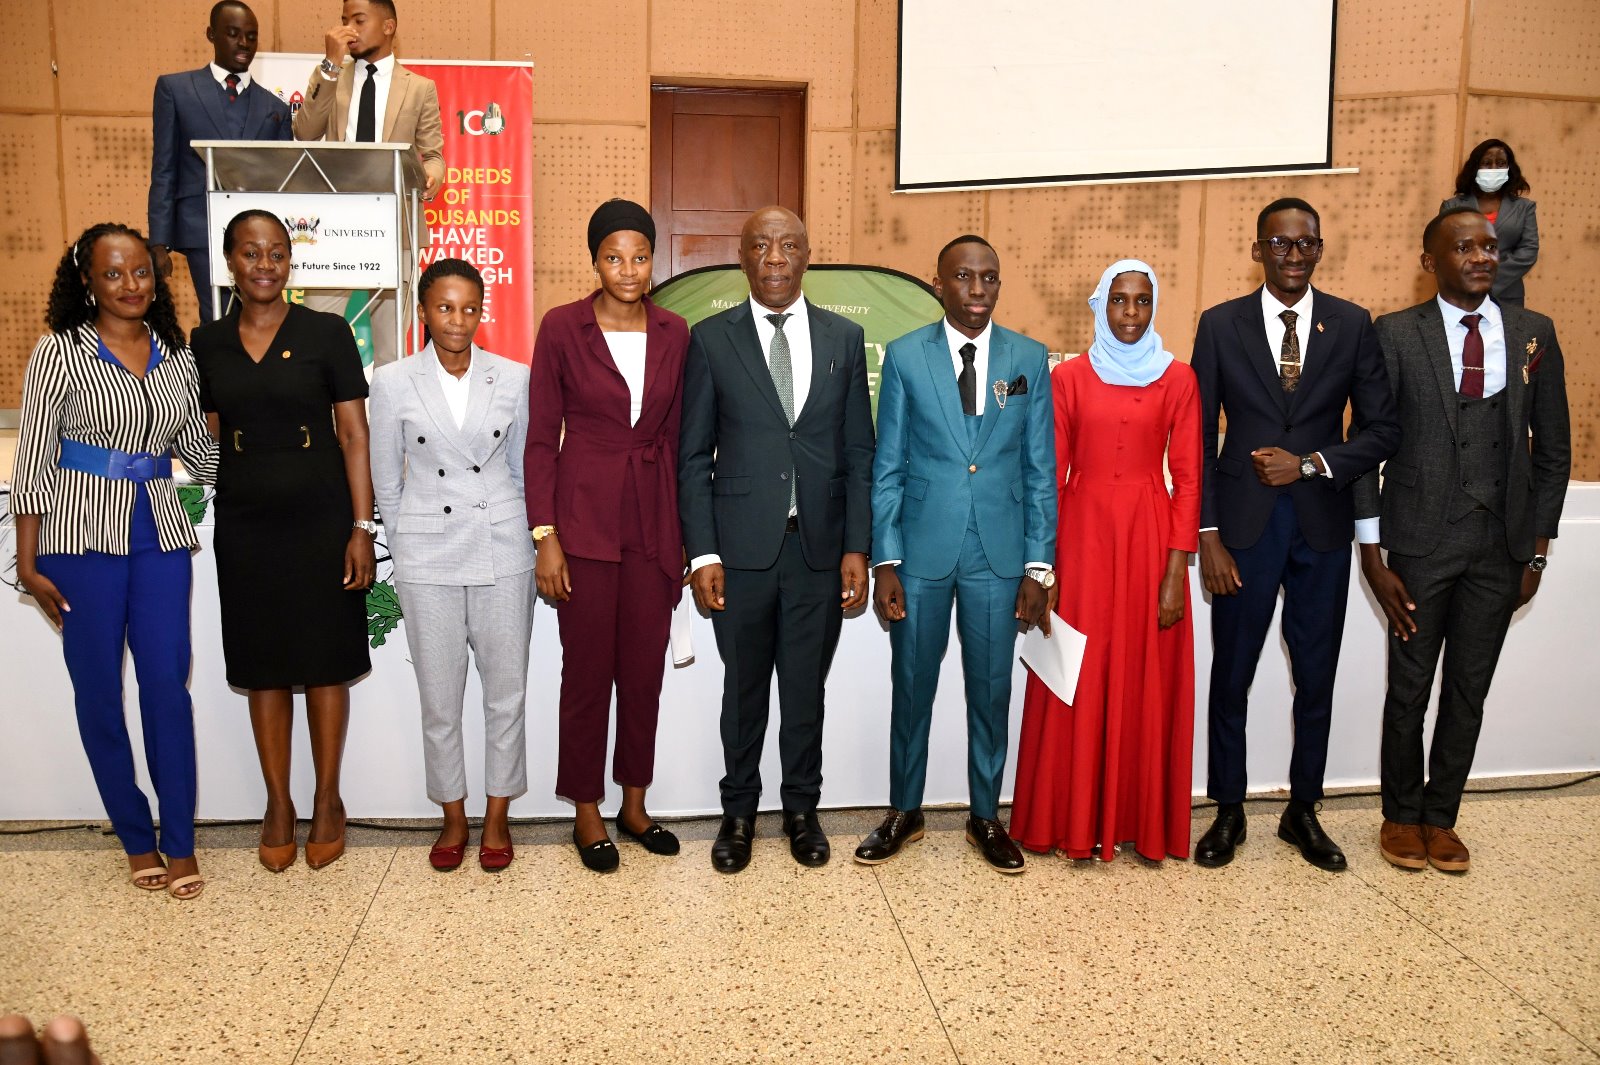 The DVCFA-Prof. Henry Alinatwe (Centre) and Dean of Students-Mrs. Winifred Kabumbuli (2nd Left) flanked by 89th Guild President-H.E. Robert Maseruka (4th Right), His Vice-H.E. Mariat Namiiro (3rd Right) and other Cabinet Members after the Swearing-in Ceremony on 24th April 2023, Yusuf Lule Auditorium, Makerere University.